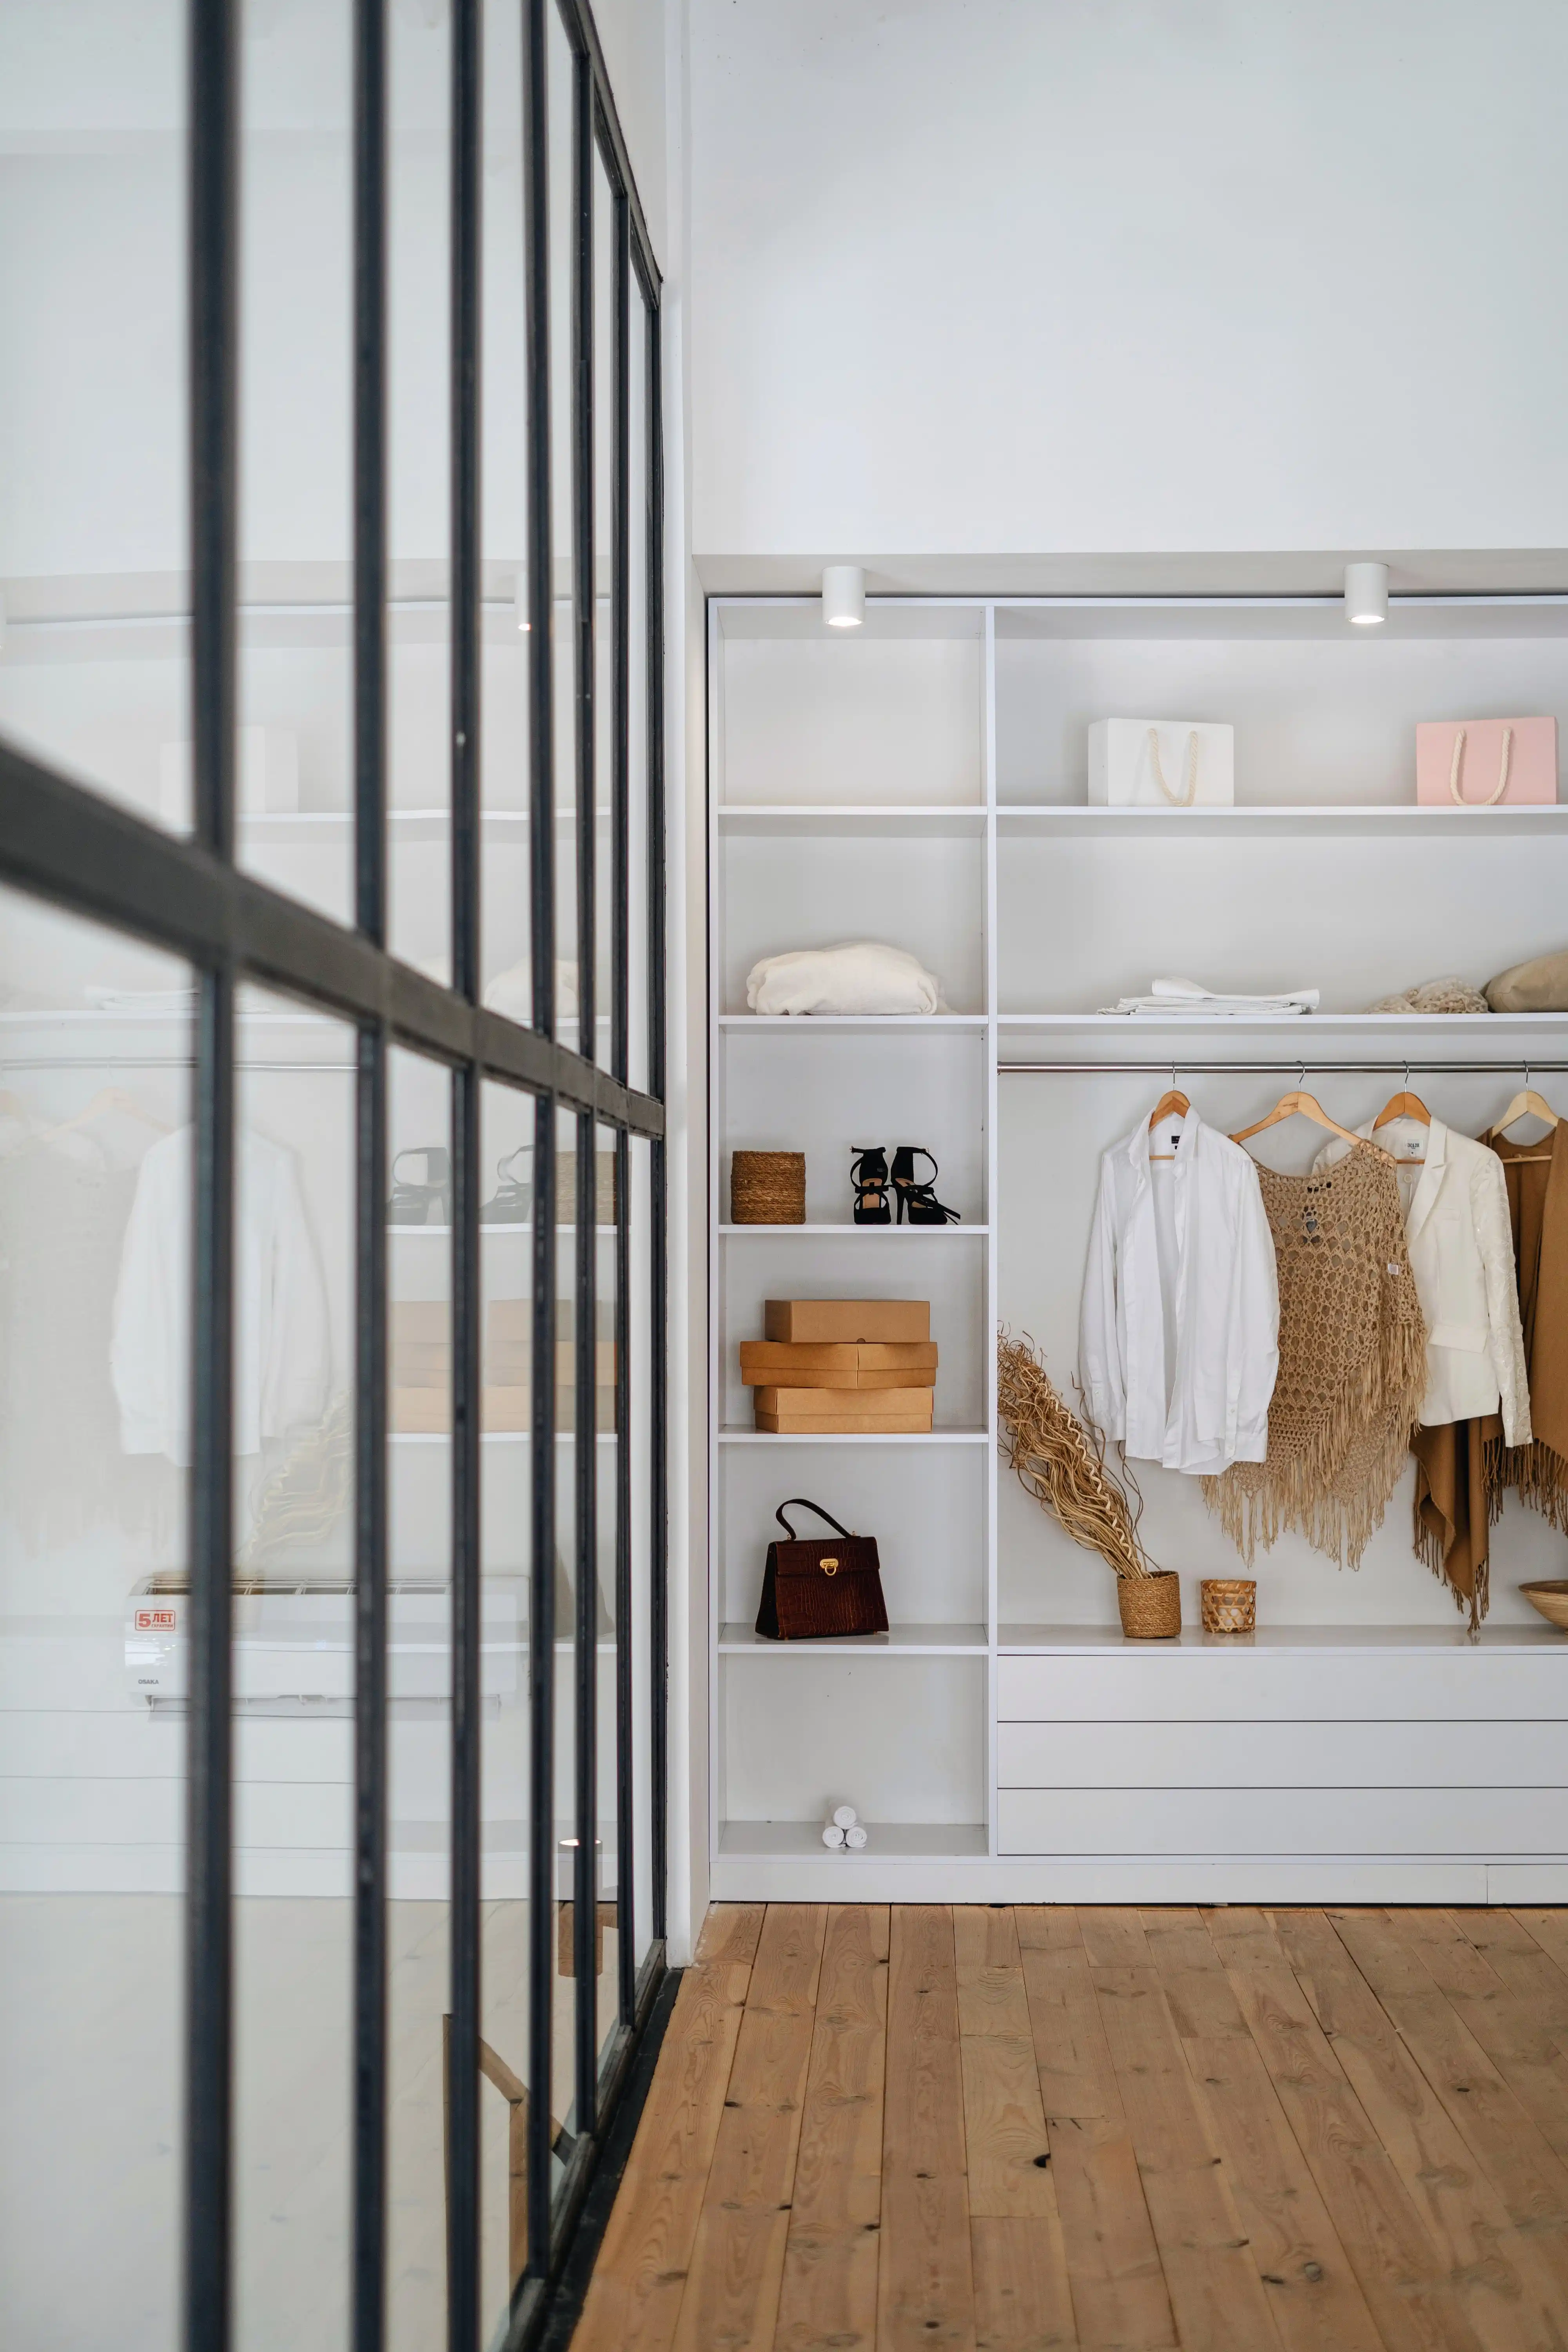 A closet with clothes hanging up and shoes on shelves